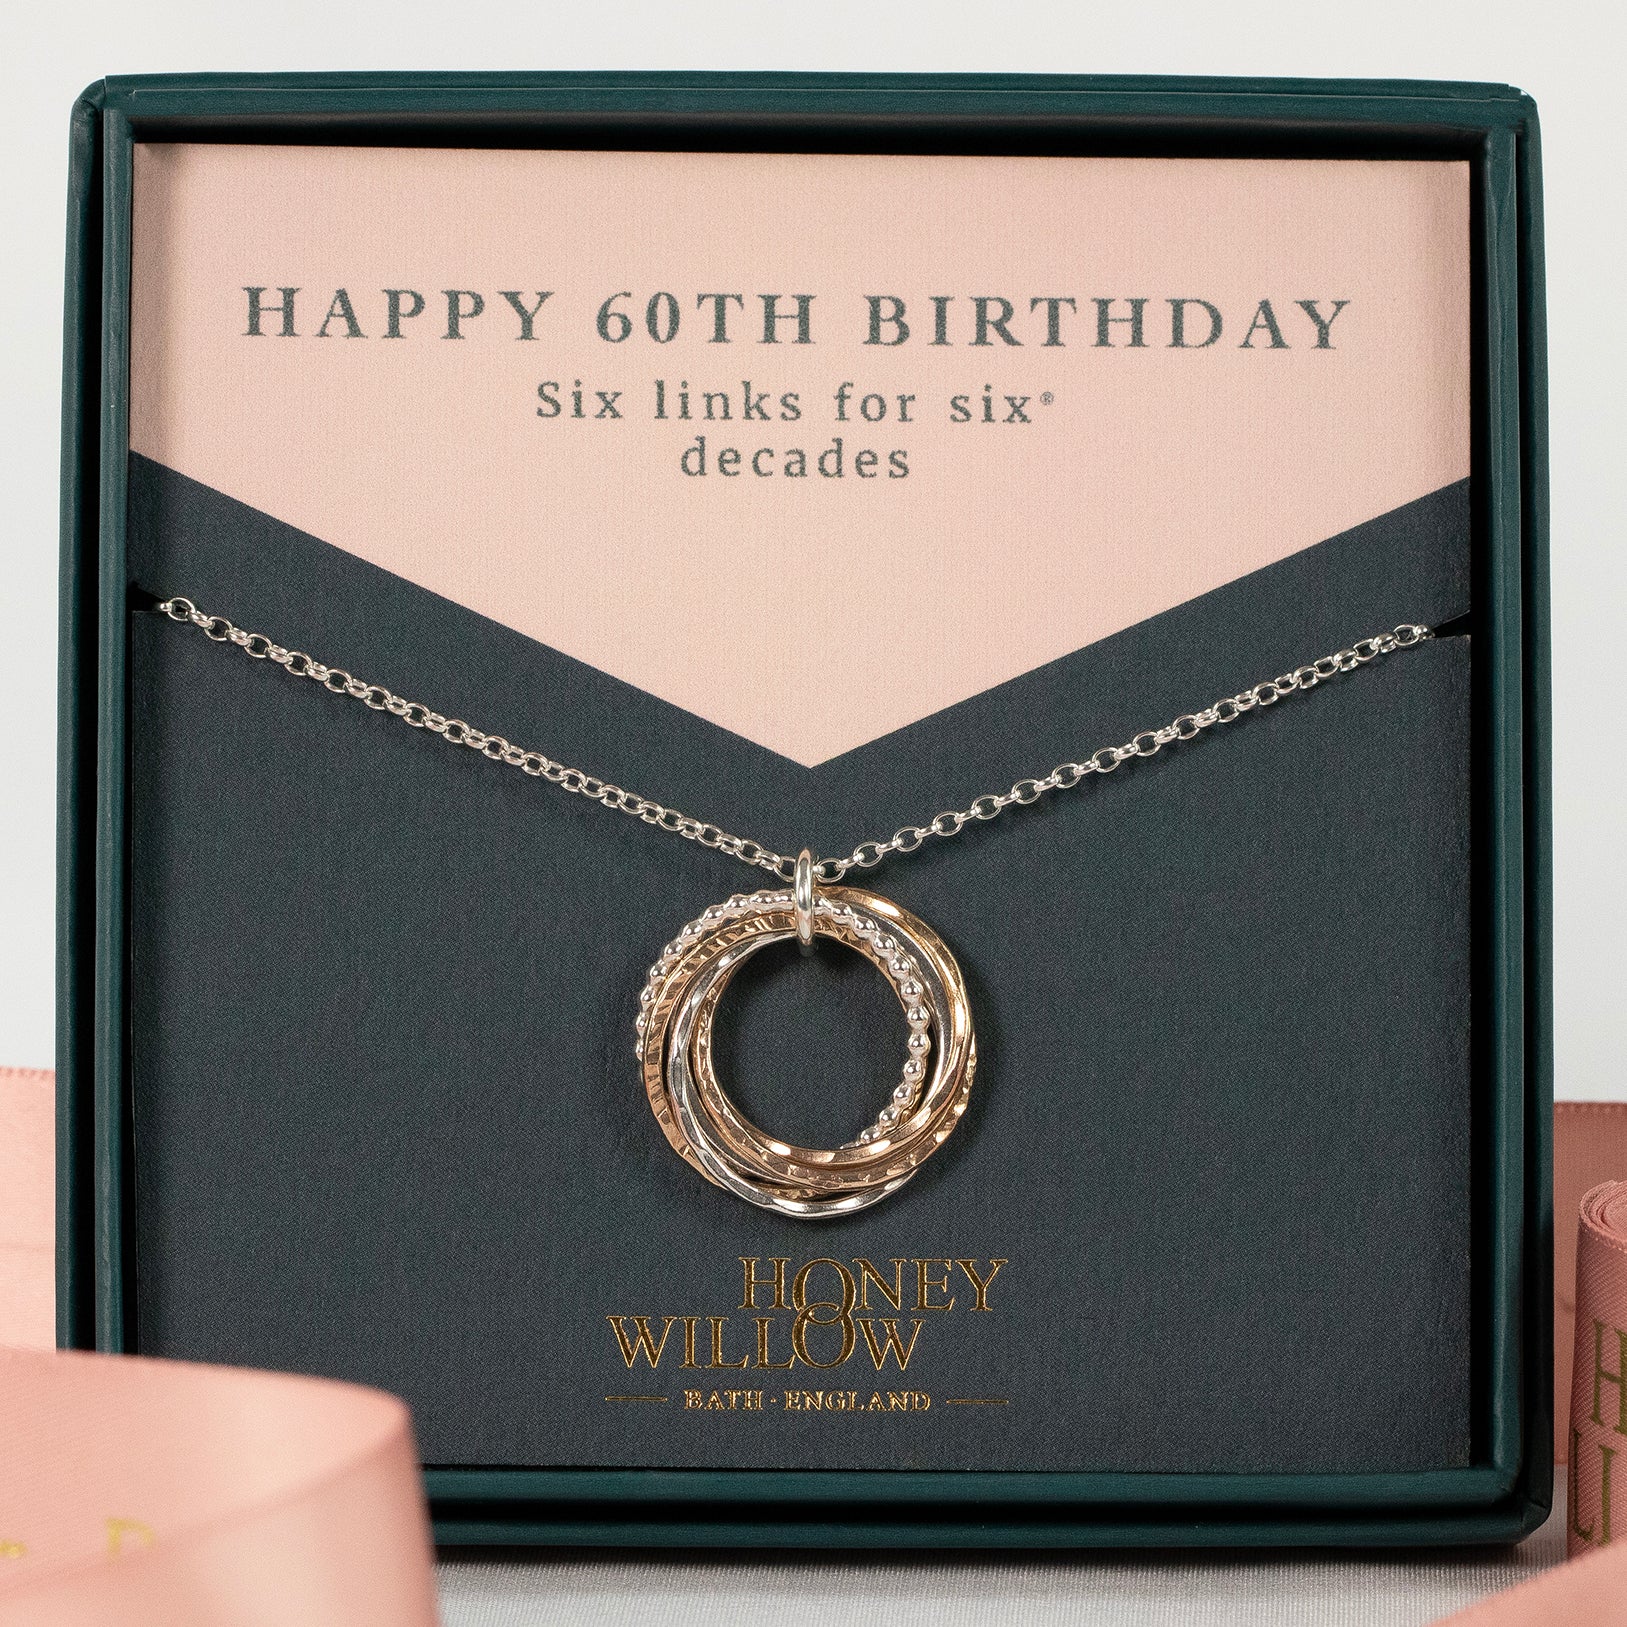 60th Birthday Necklace - The Original 6 Links for 6 Decades Necklace - Silver & Gold